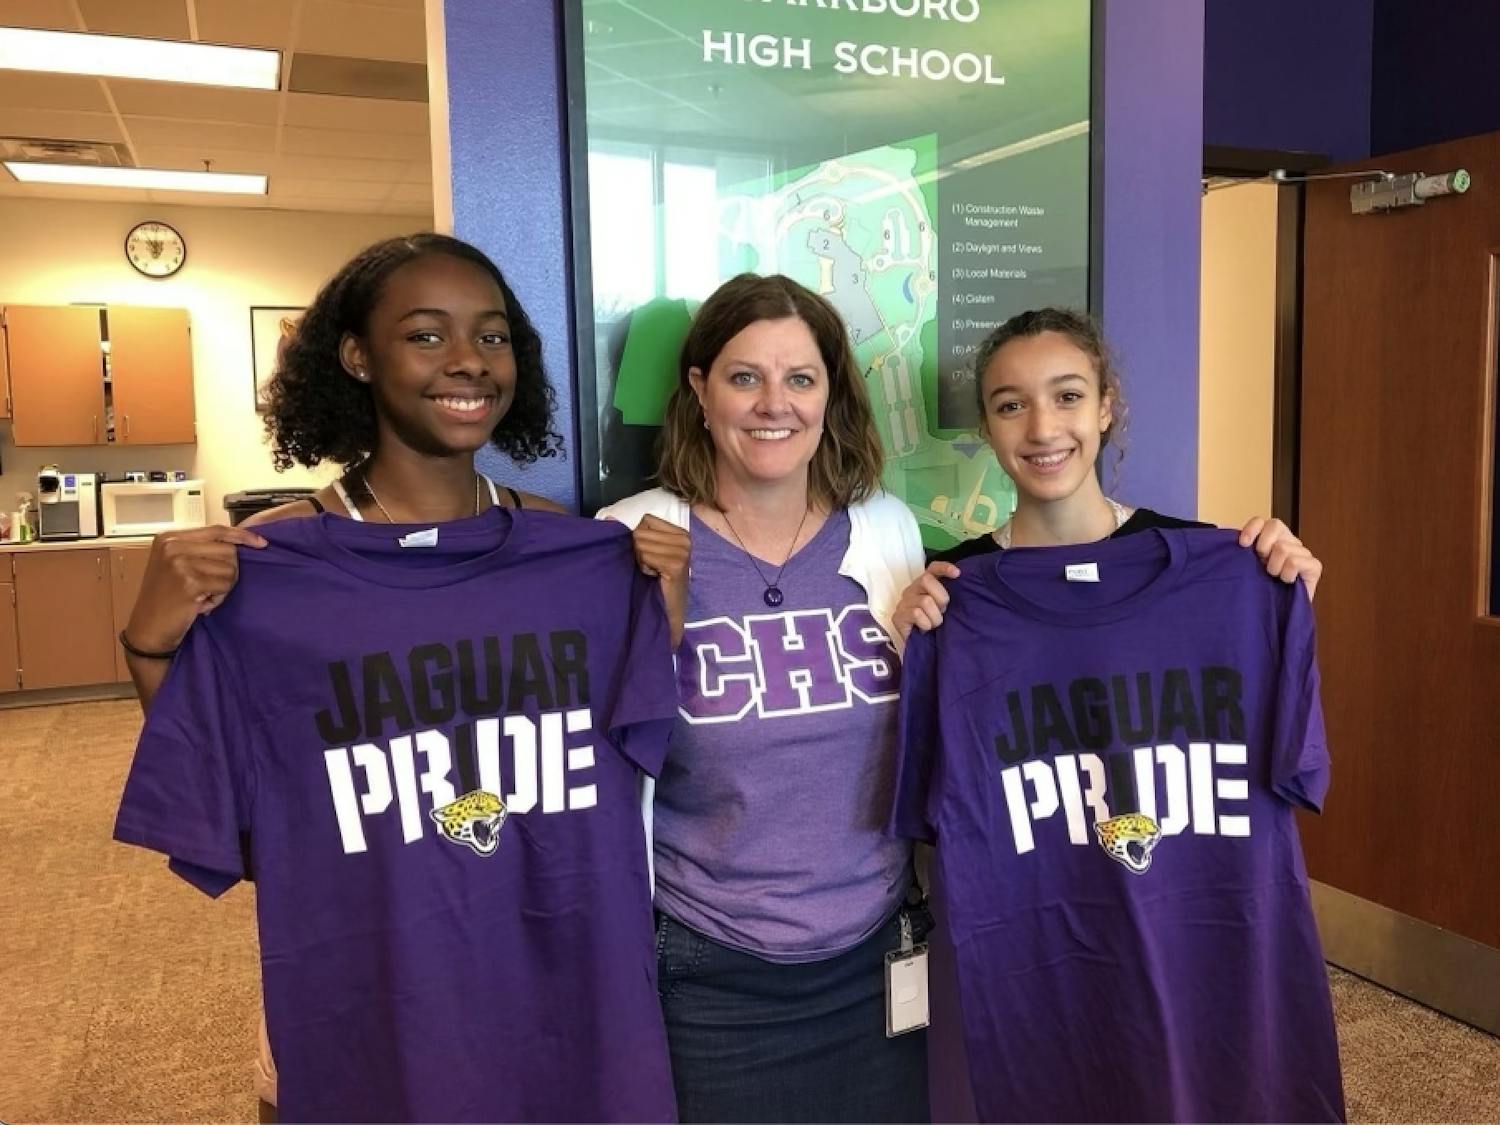 Carrboro High School Principal Beverly Rudolph (center) announced her retirement from K-12 education on March 1. She is pictured with students Rekiyah Bobbitt (left) and Louise Lounes (right). Photo courtesy of Beverly Rudolph.